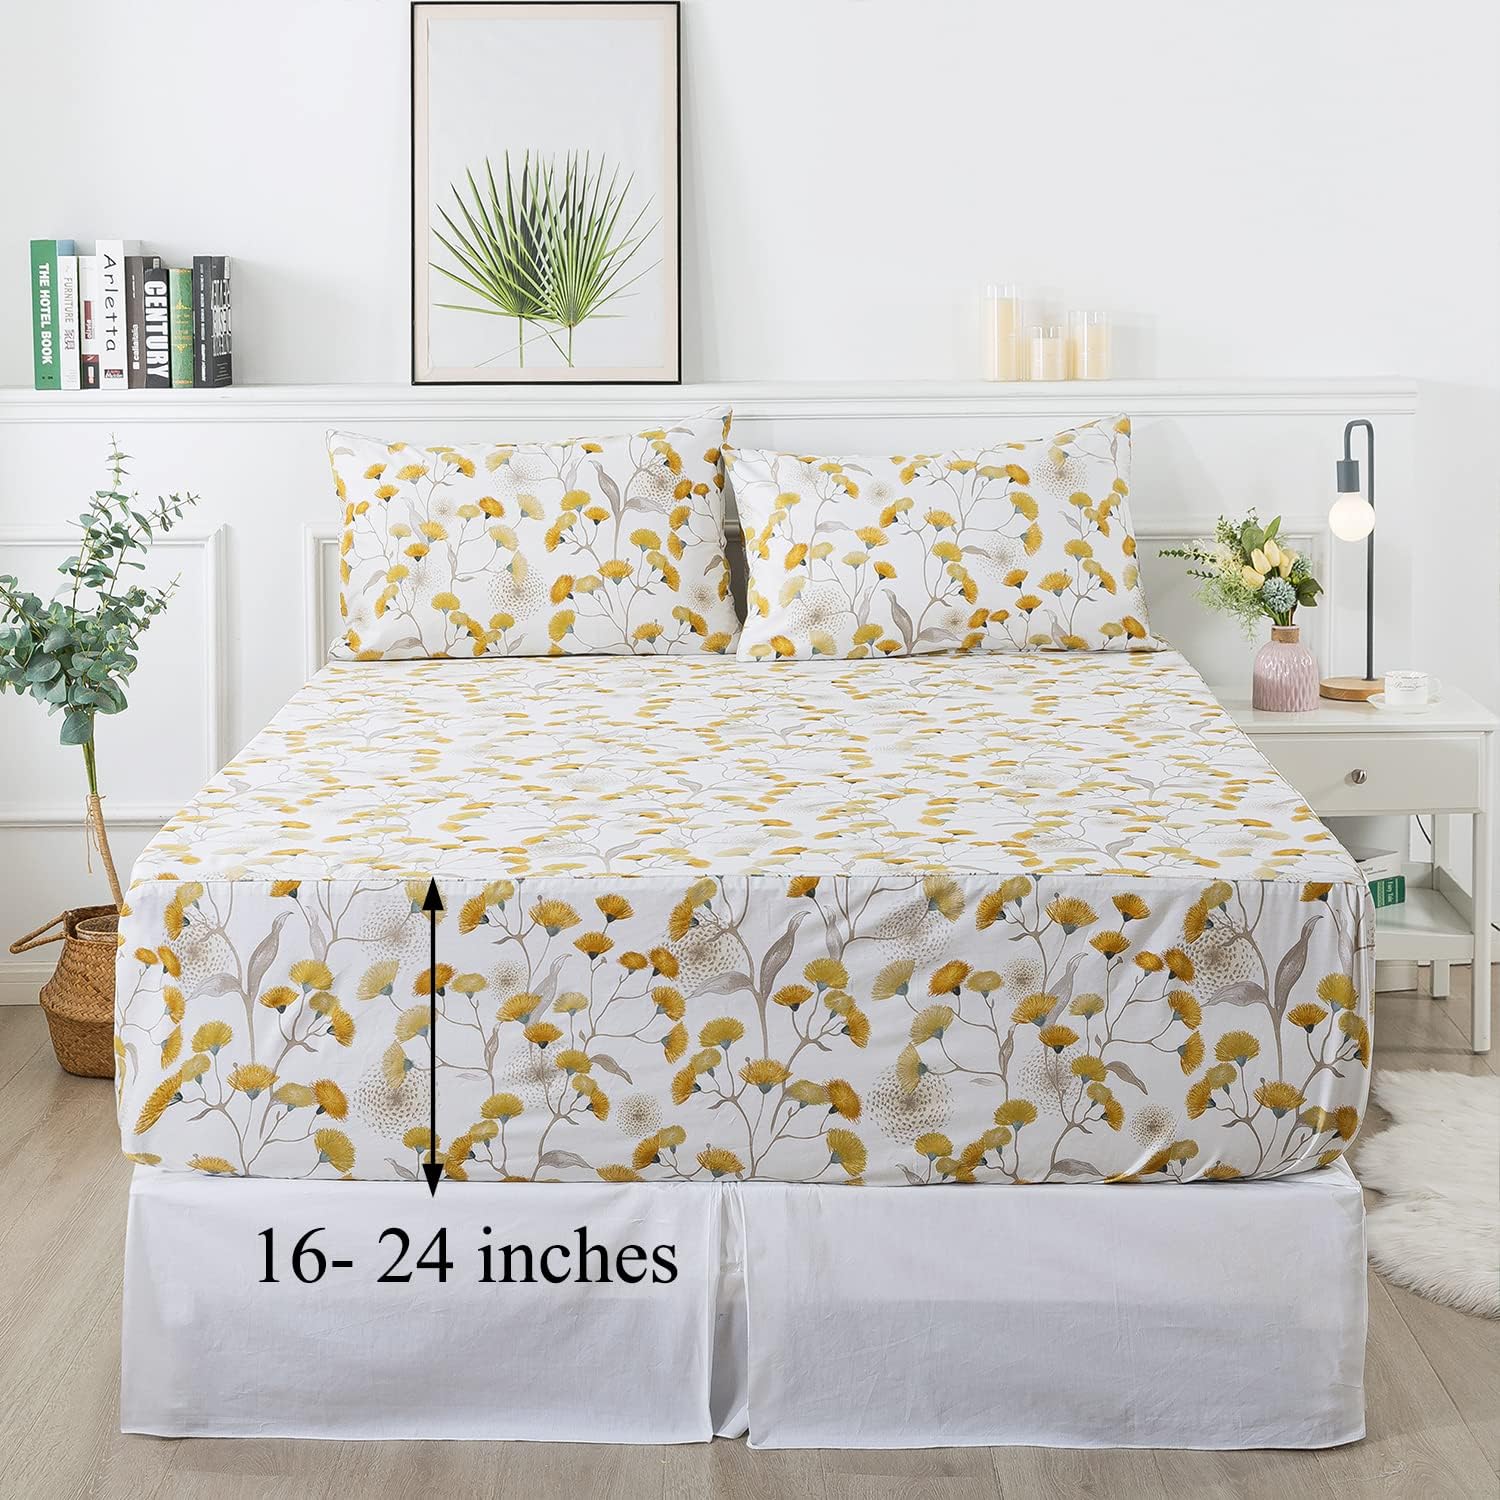 FADFAY Extra Deep Pocket Twin Sheets 100% Cotton Yellow and Grey Bedding White Floral Botanical Dandelion Printed Bed Sheets Luxury Leaf Branches Pattern Nature Super Soft 18 to 23 inches 4Pcs, Twin